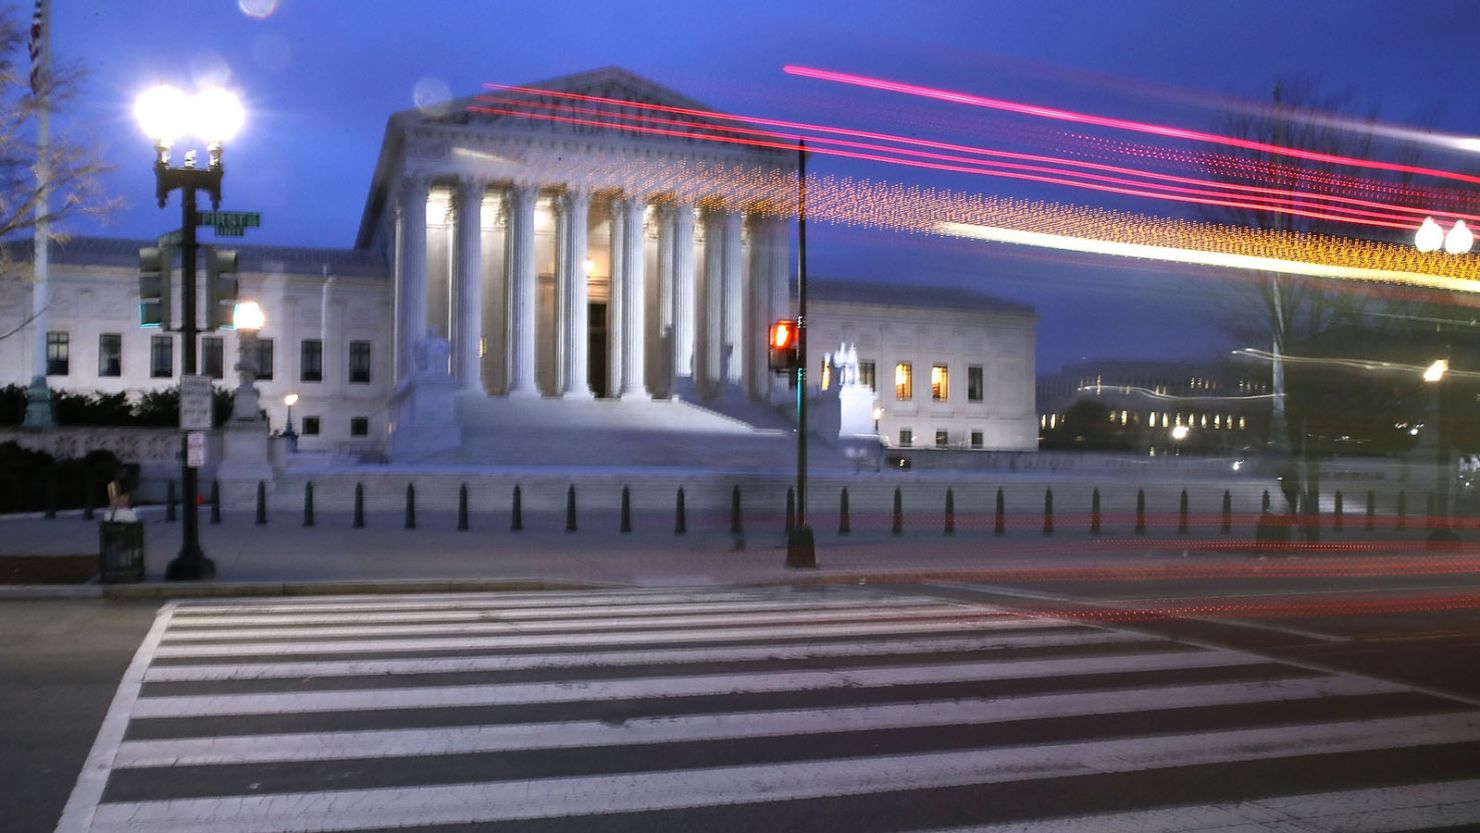 A bus passes the Supreme Court building in Washington on January 31, 2017.